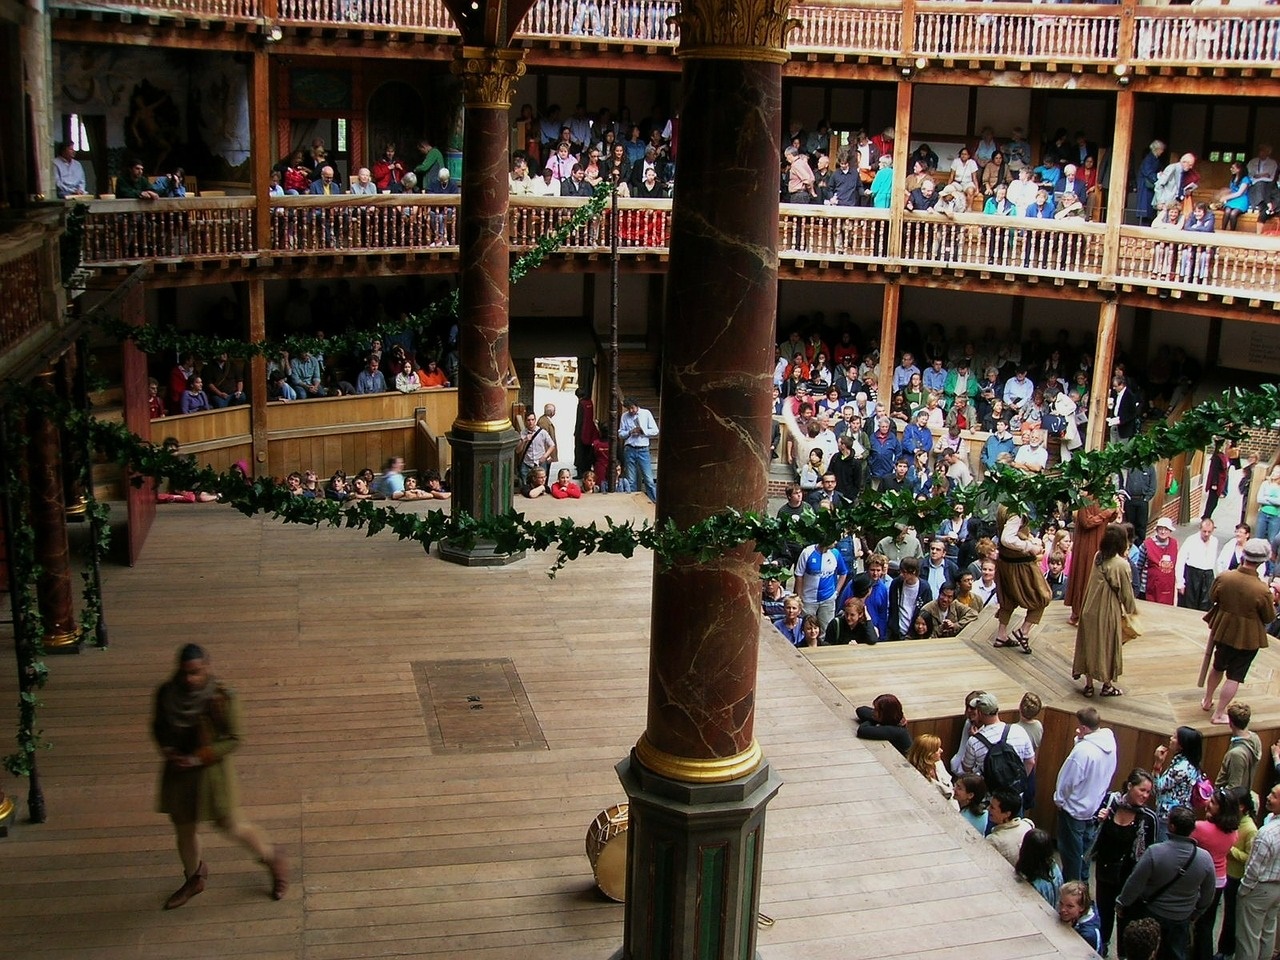 Globe Theater study shakespeare in your homeschool #homeschool #homeschooling #studyshakespeareinhomeschool #shakespearelessonplans #shakespearestudy